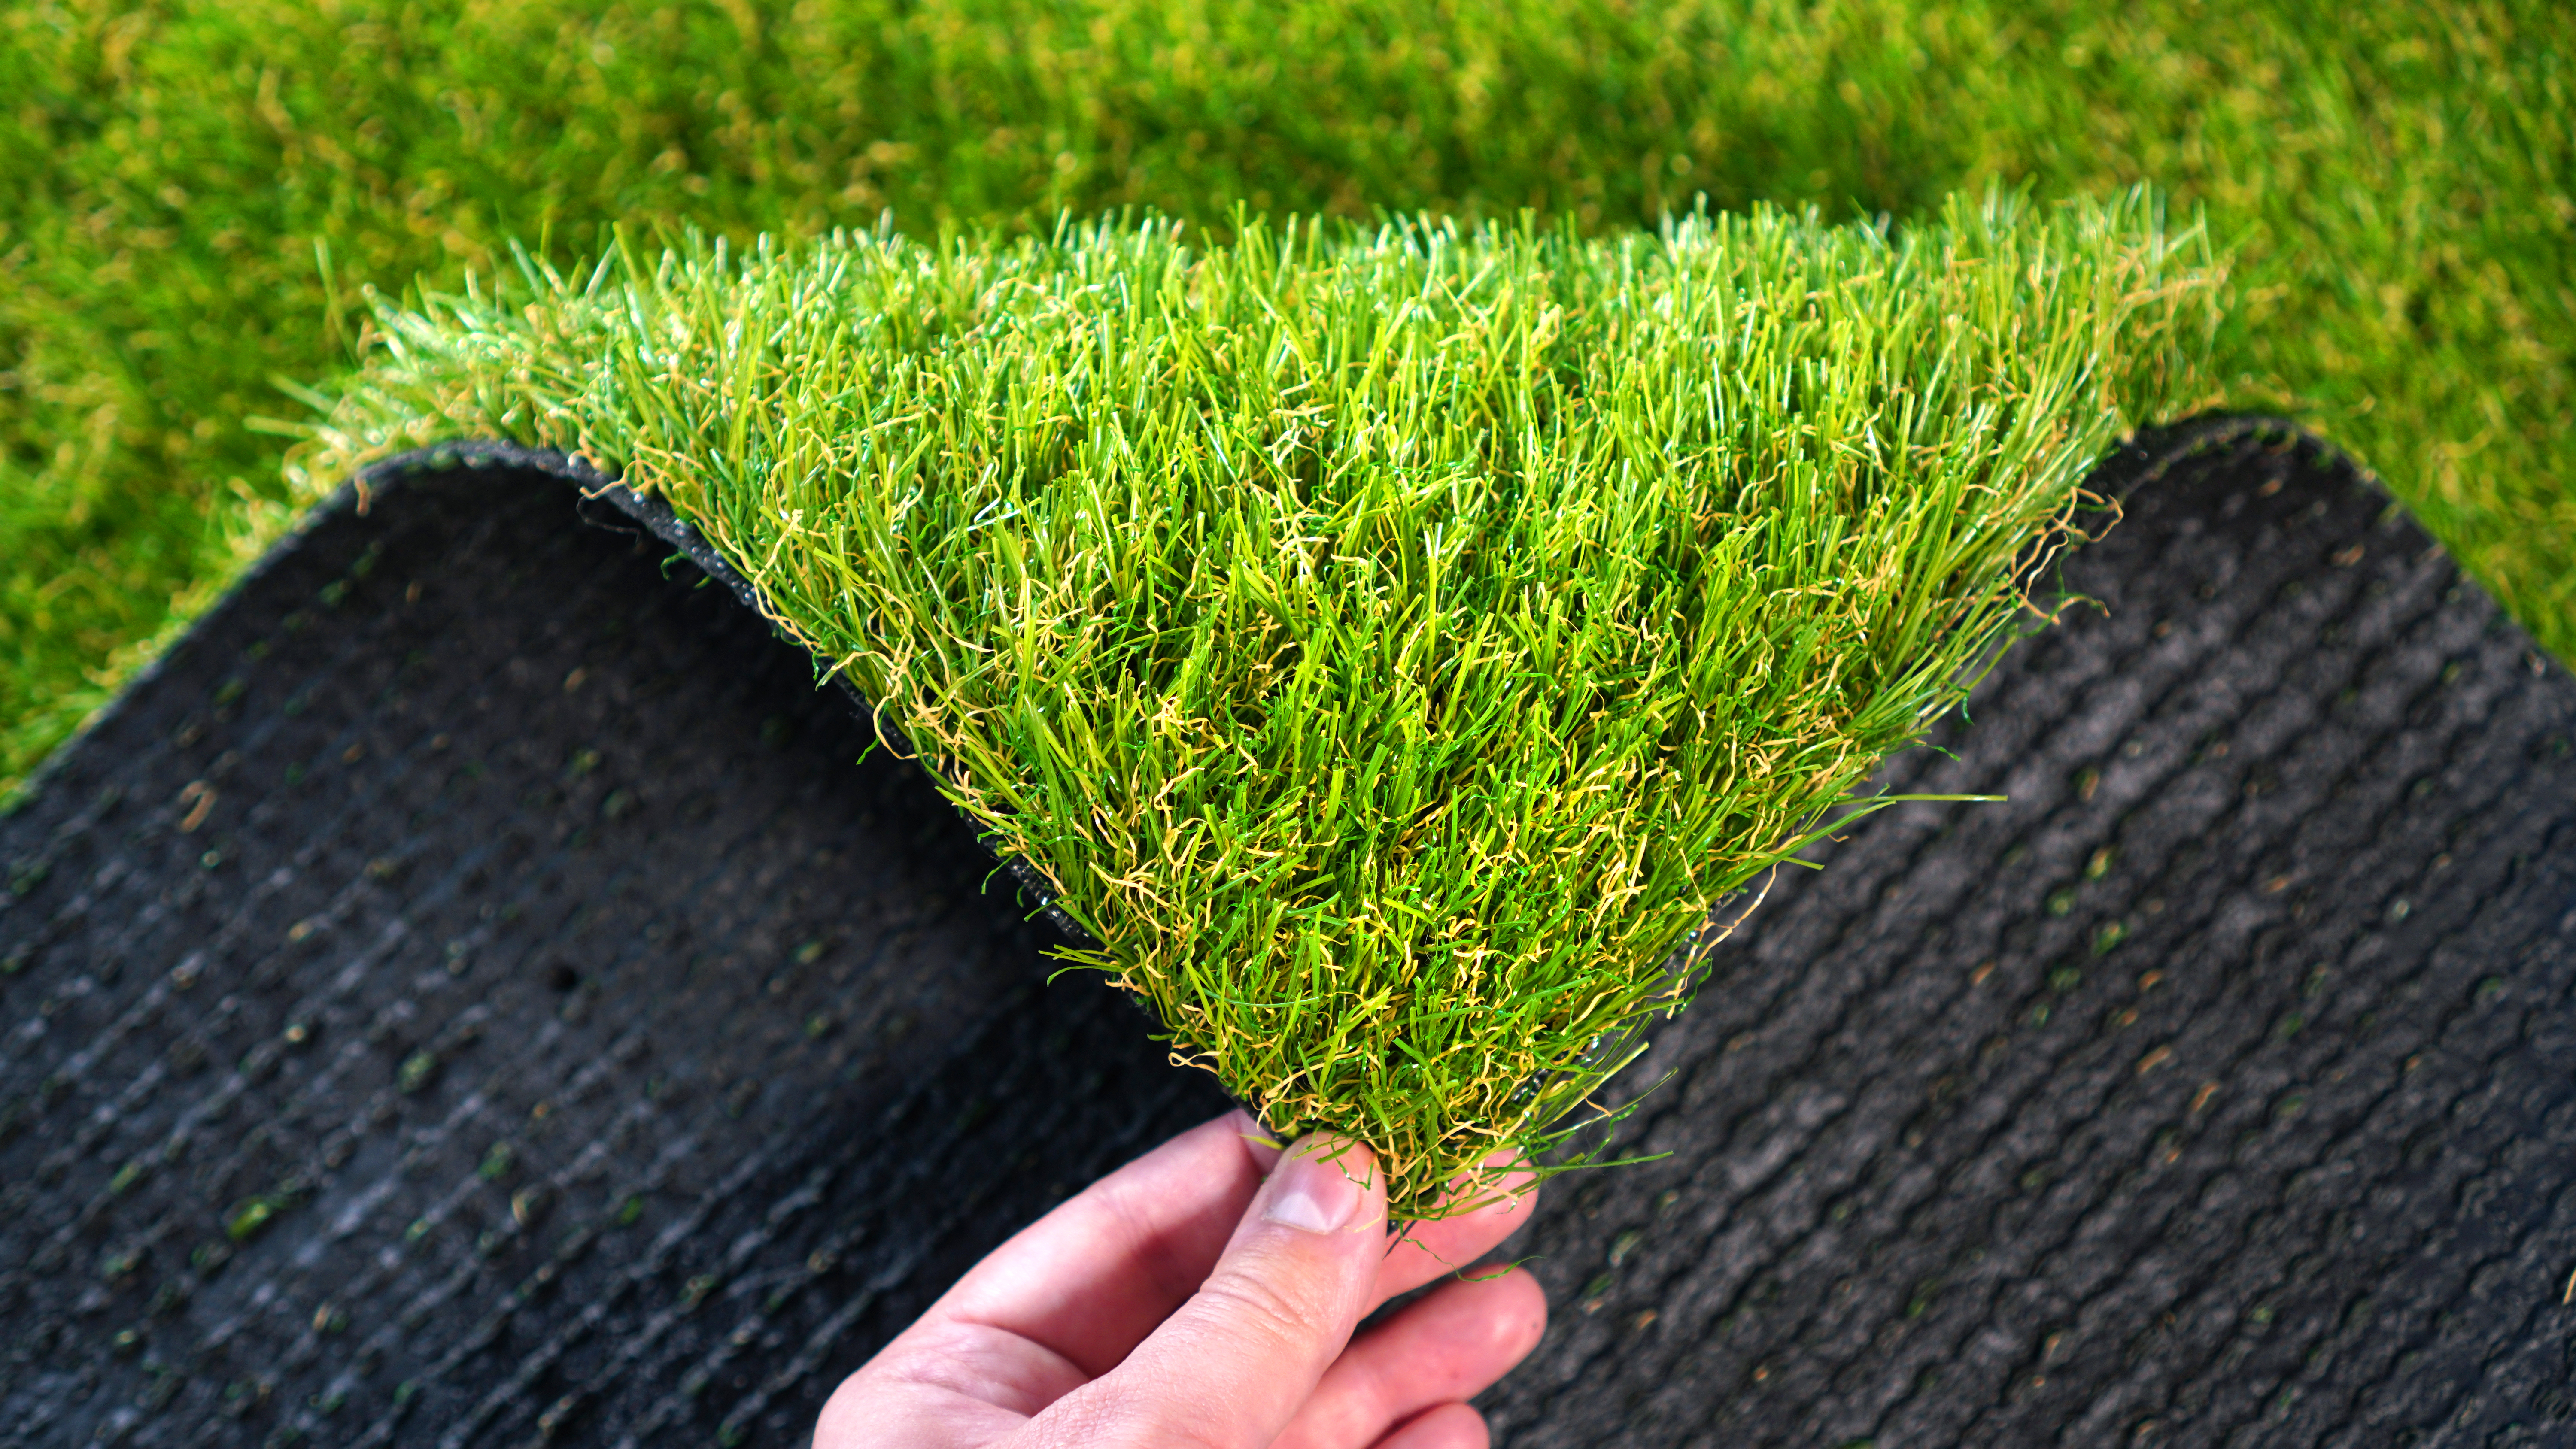 The Global Market for Artificial Turf 2022